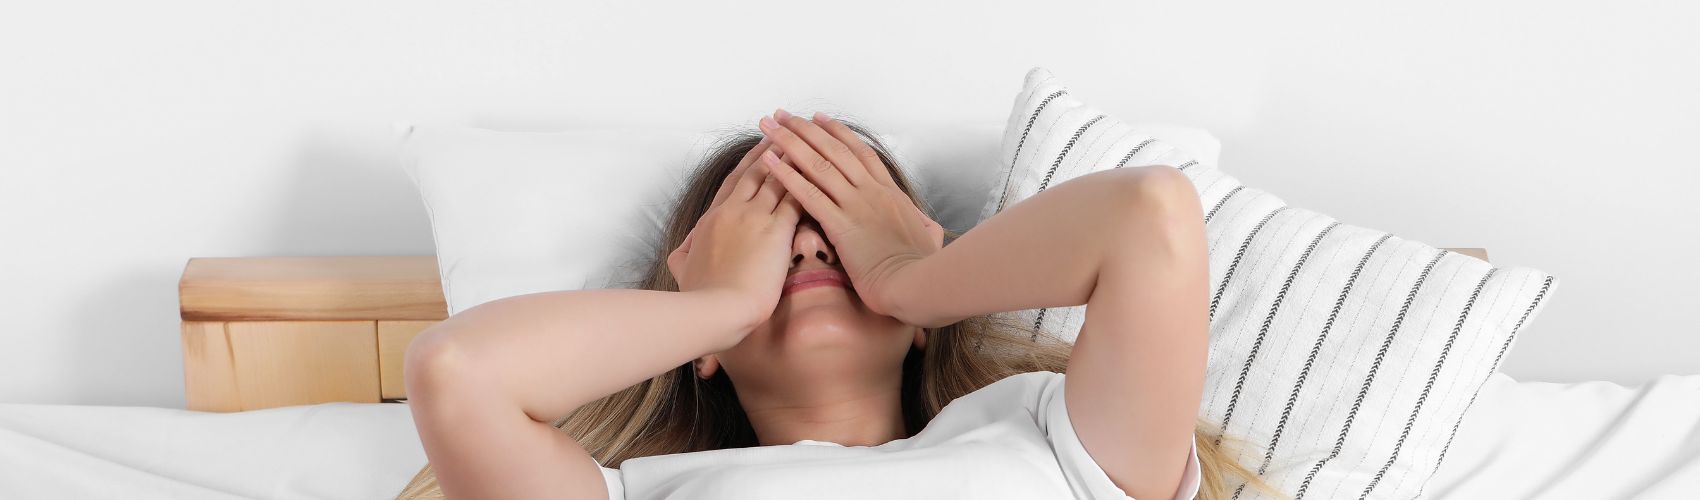 Woman in bed with hands over her face